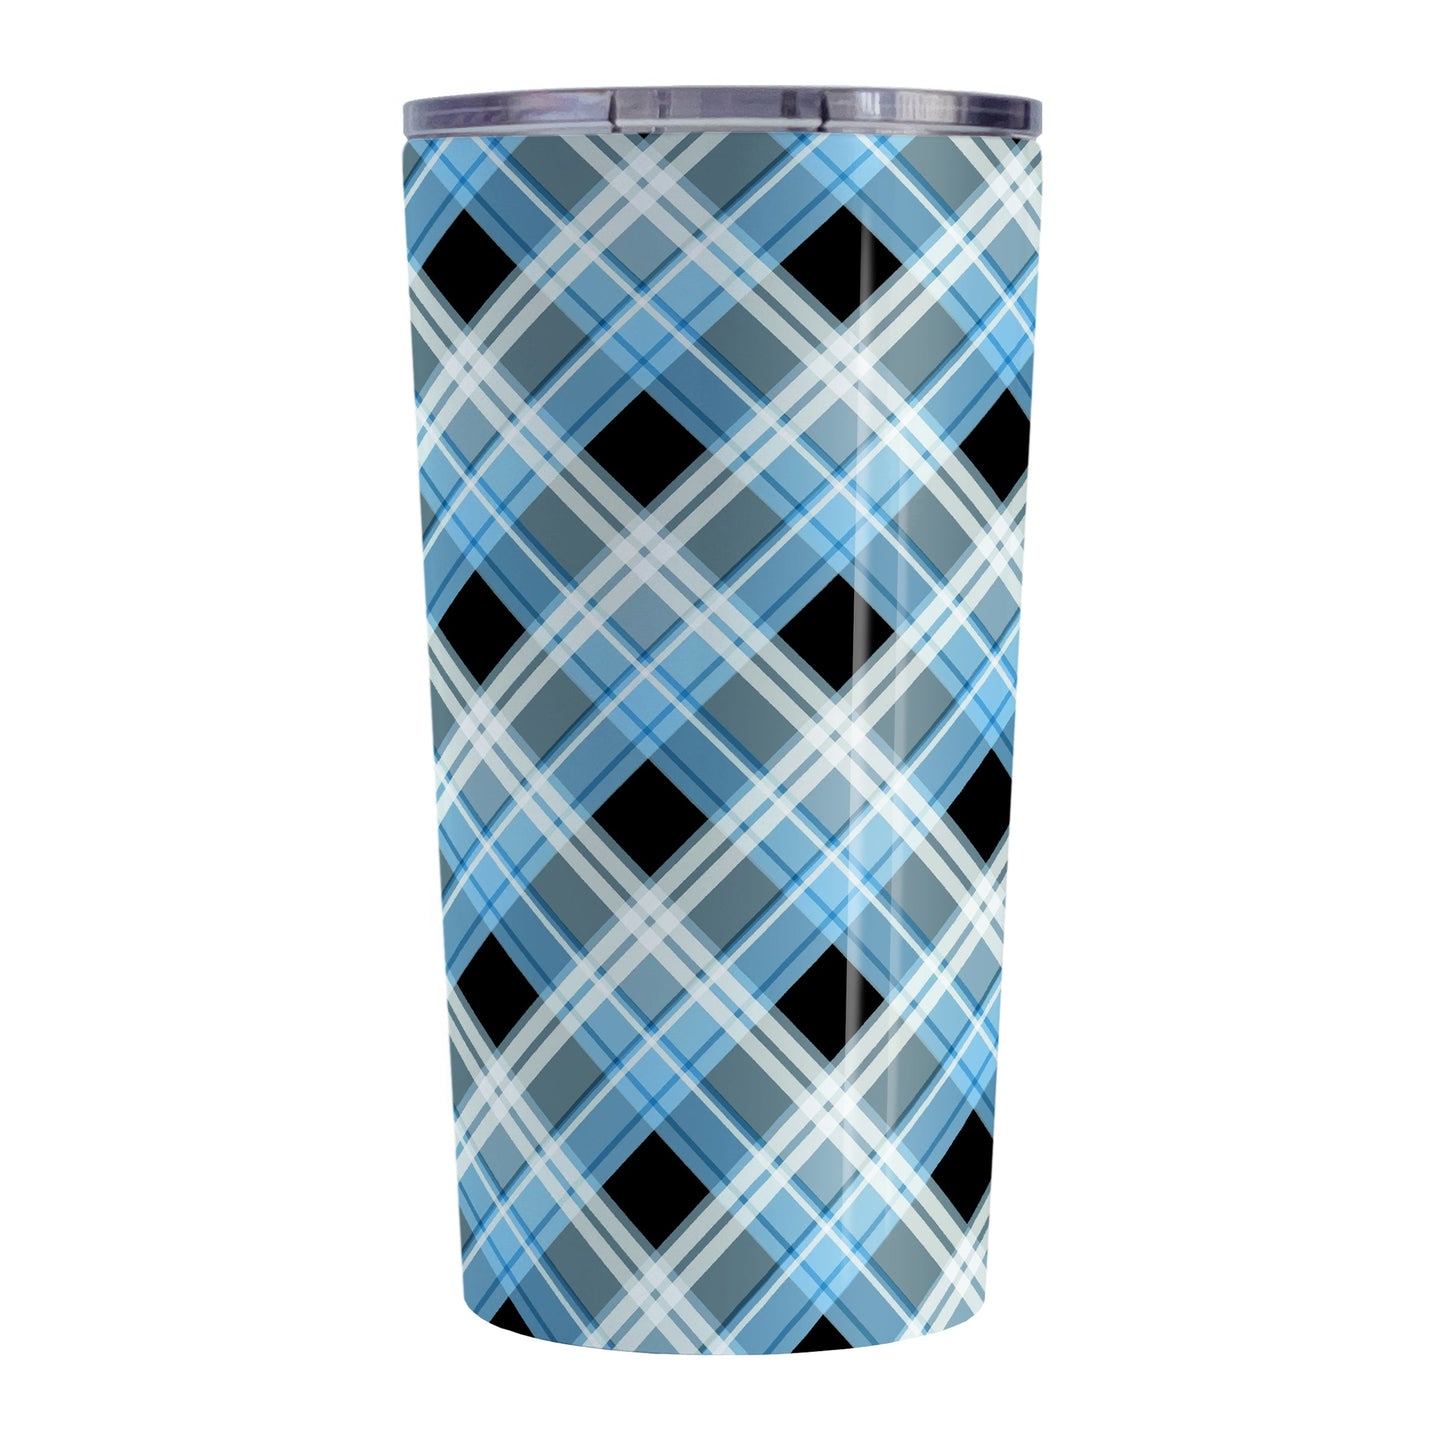 Alternative Black and Blue Plaid Tumbler Cup (20oz) at Amy's Coffee Mugs. A stainless steel insulated tumbler cup designed with a diagonal blue, black, and white plaid pattern that wraps around the cup. A tumbler cup designed for someone who loves plaid patterns and the colors blue and black together.